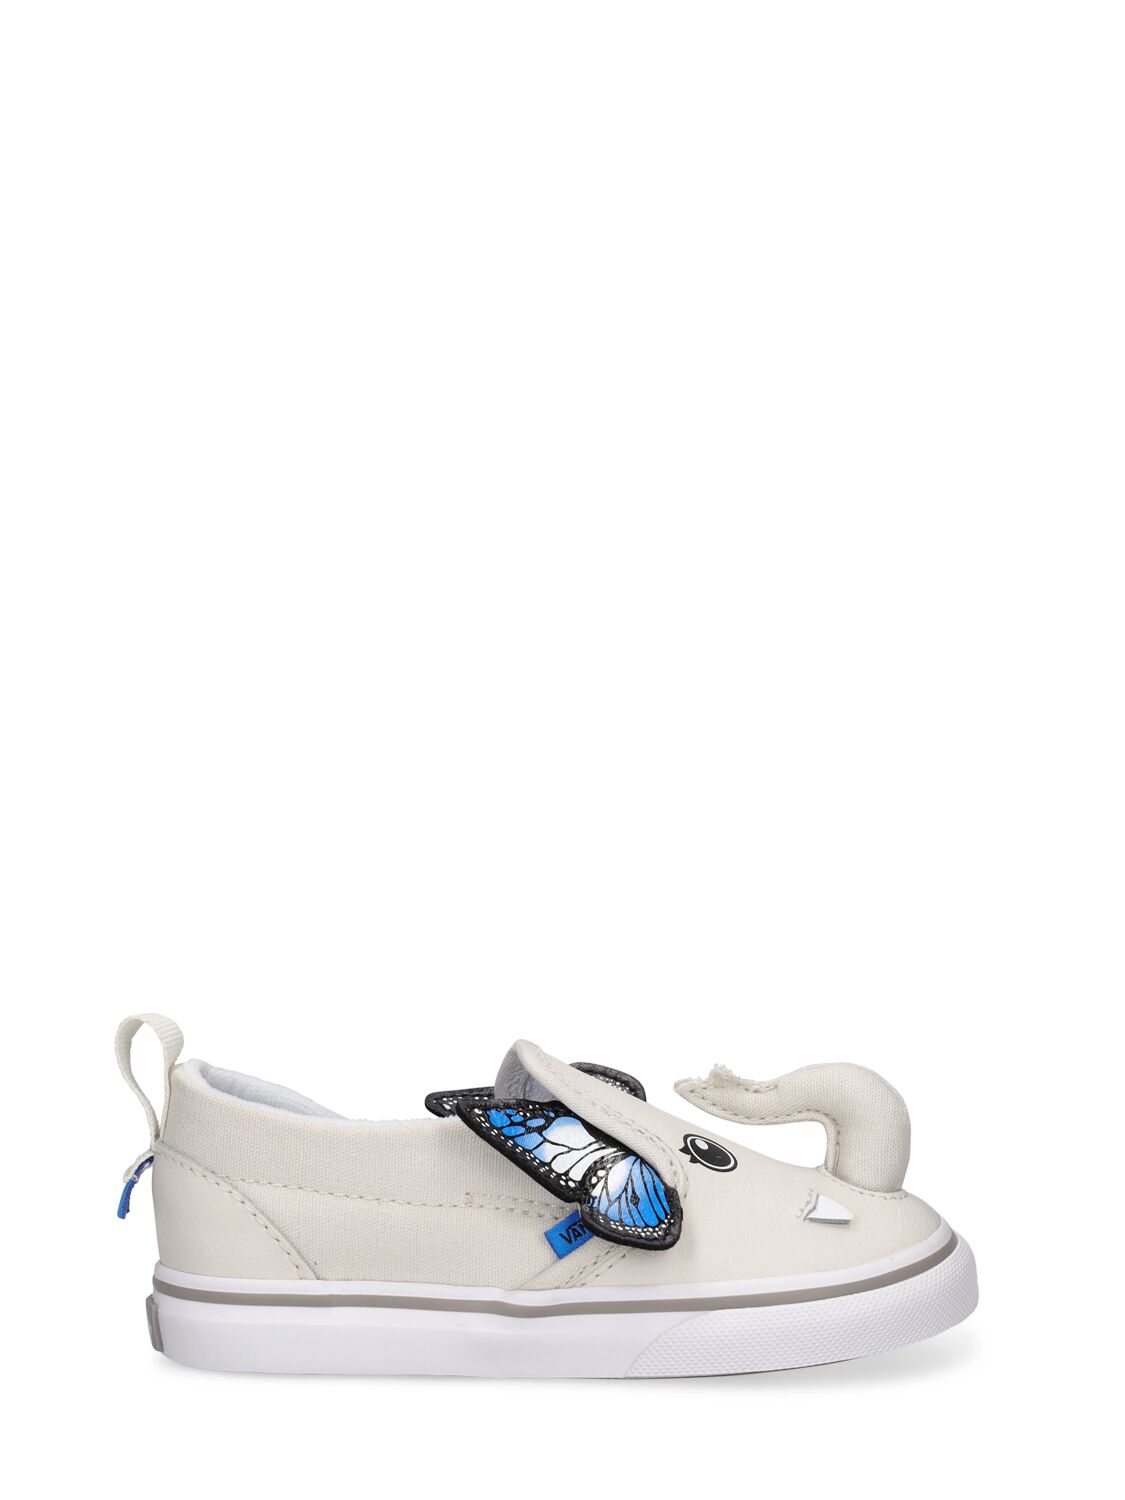 Image of Leather Elephant Slip-on Sneakers